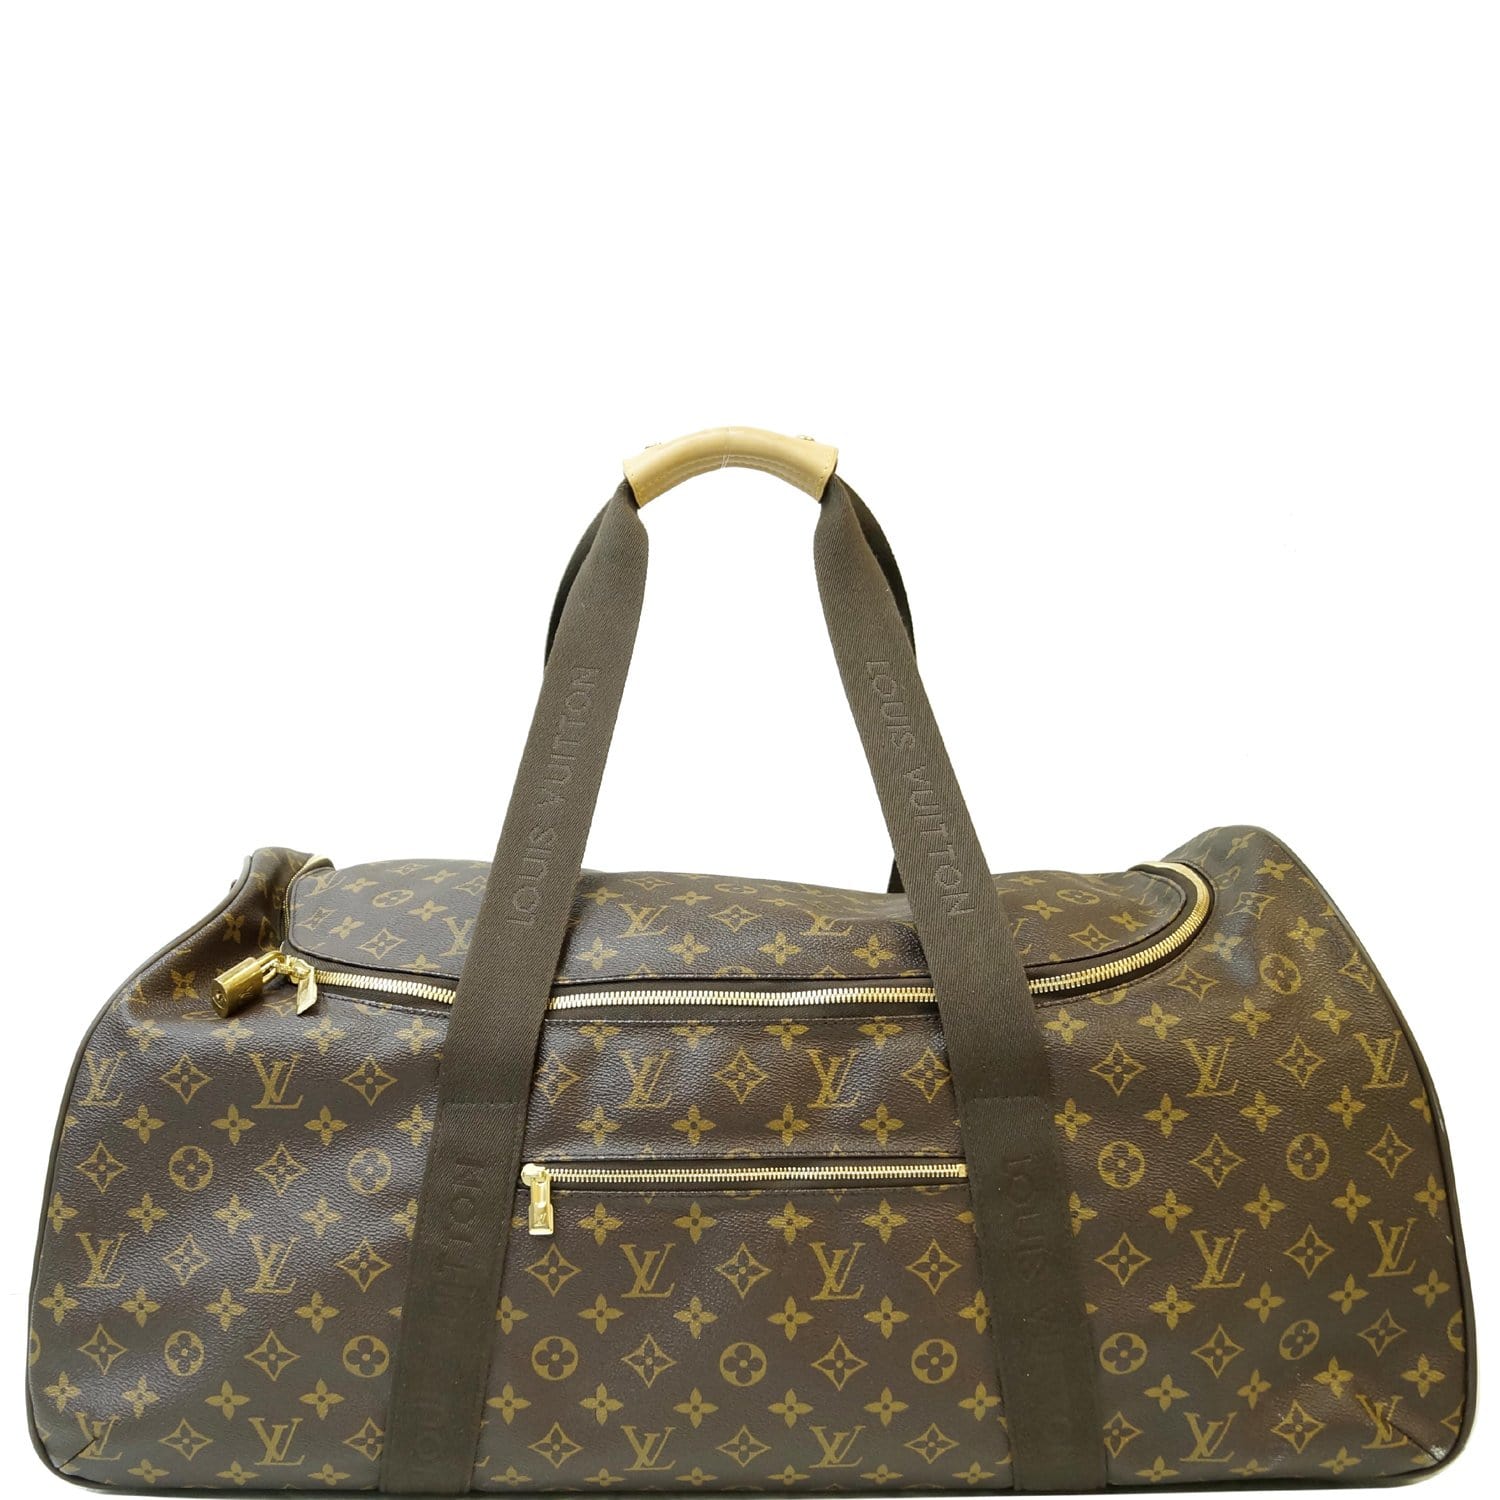 Luggage Louis Vuitton Monogram Brown Neo Eole 55 Rolling Convertable Duffle